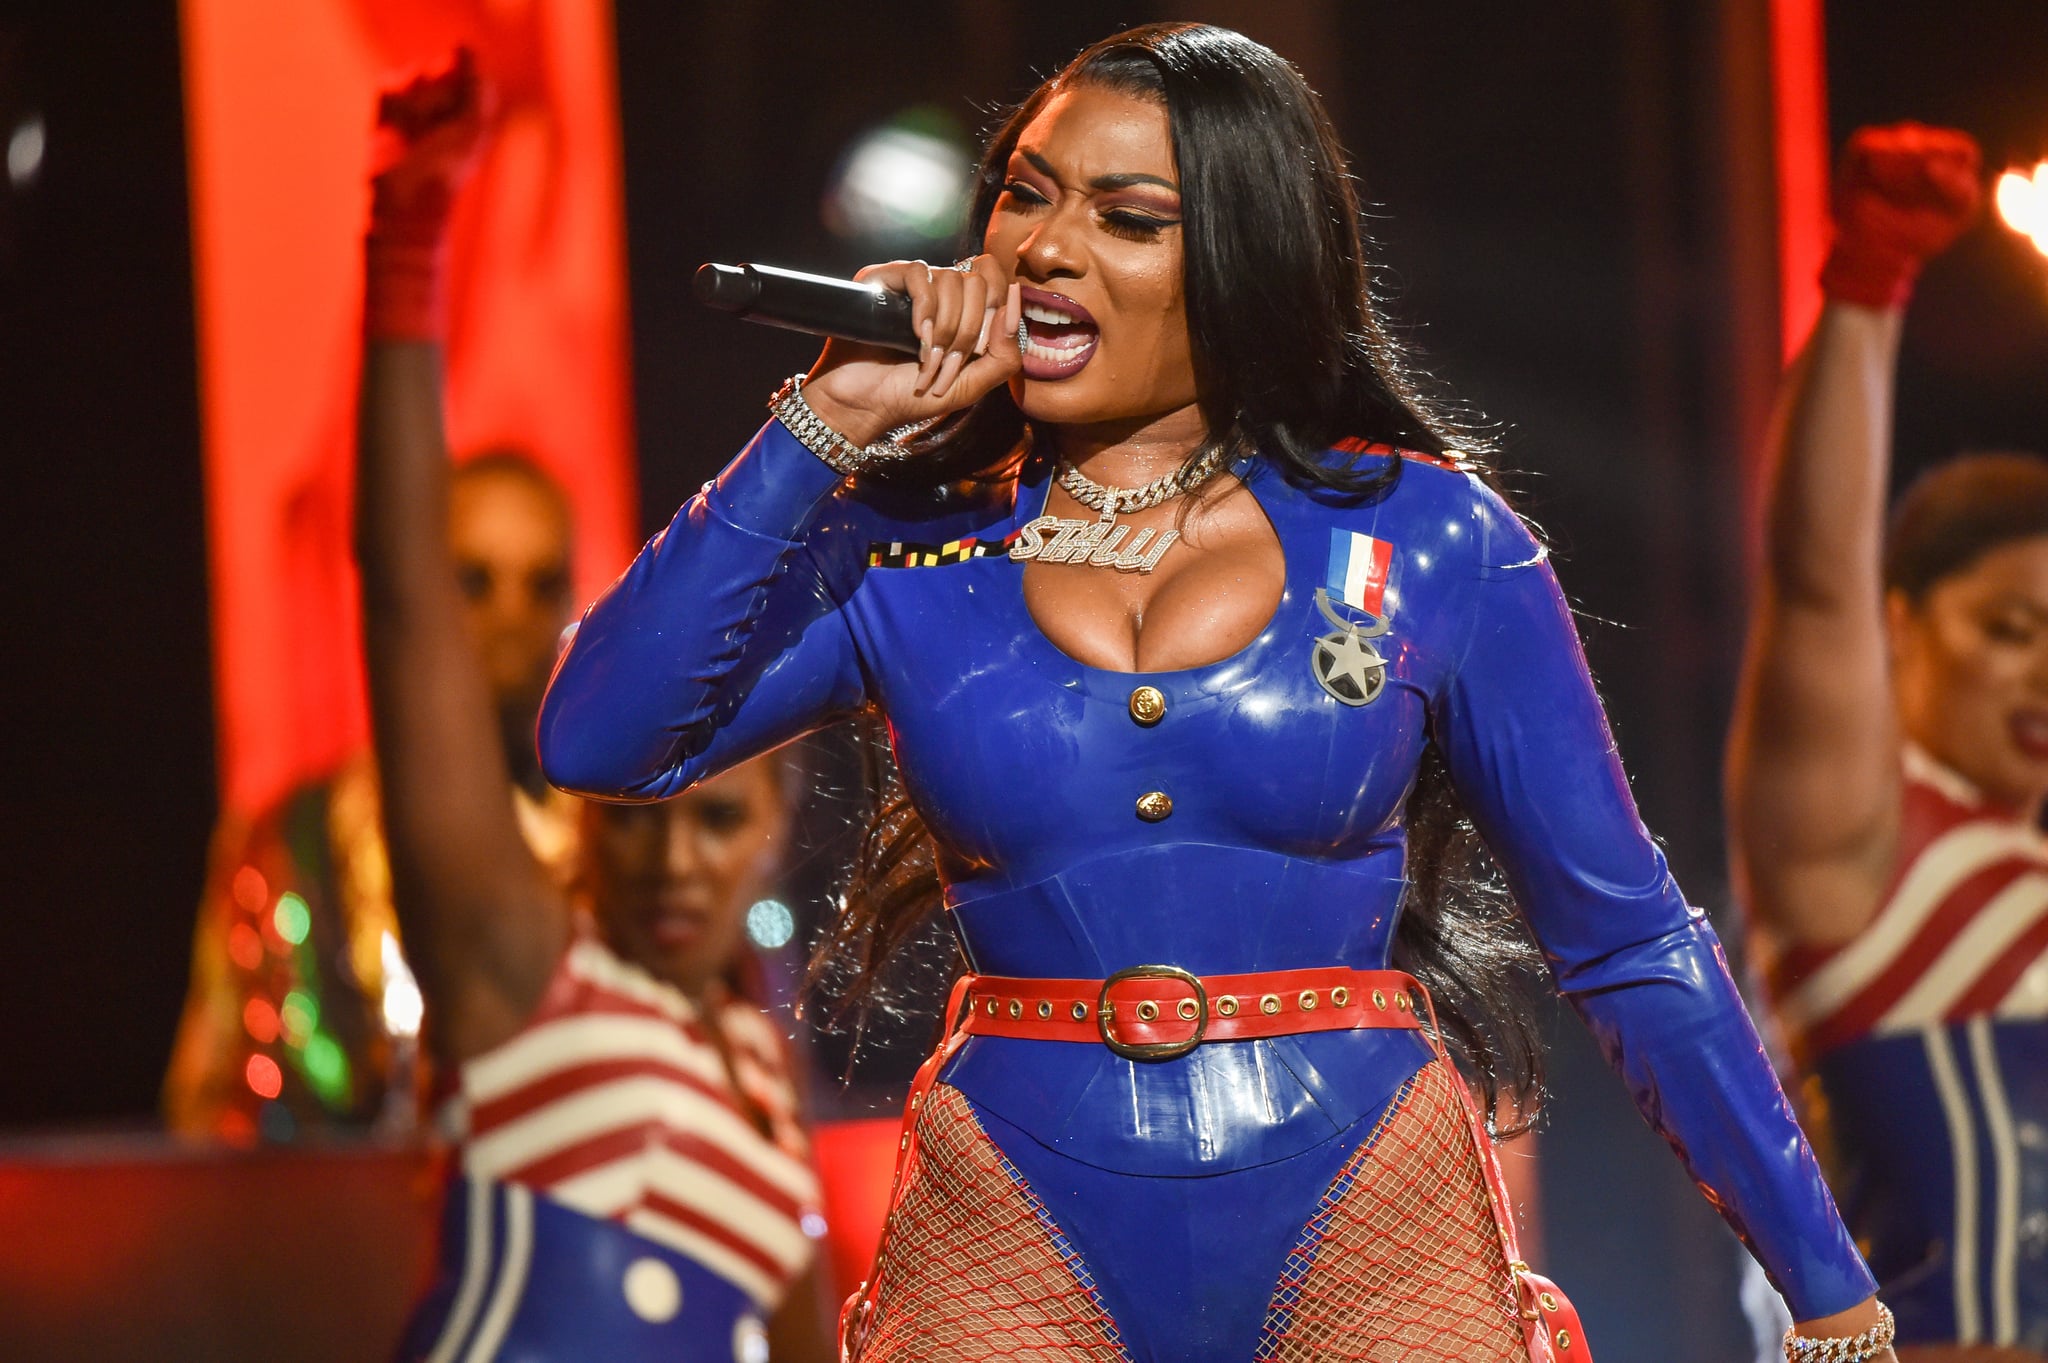 ATLANTA, GEORGIA - OCTOBER 05: Rapper Megan Thee Stallion performs onstage at the 2019 BET Hip Hop Awards at Cobb Energy Performing Arts Centre on October 05, 2019 in Atlanta, Georgia. (Photo by Aaron J. Thornton/WireImage,)